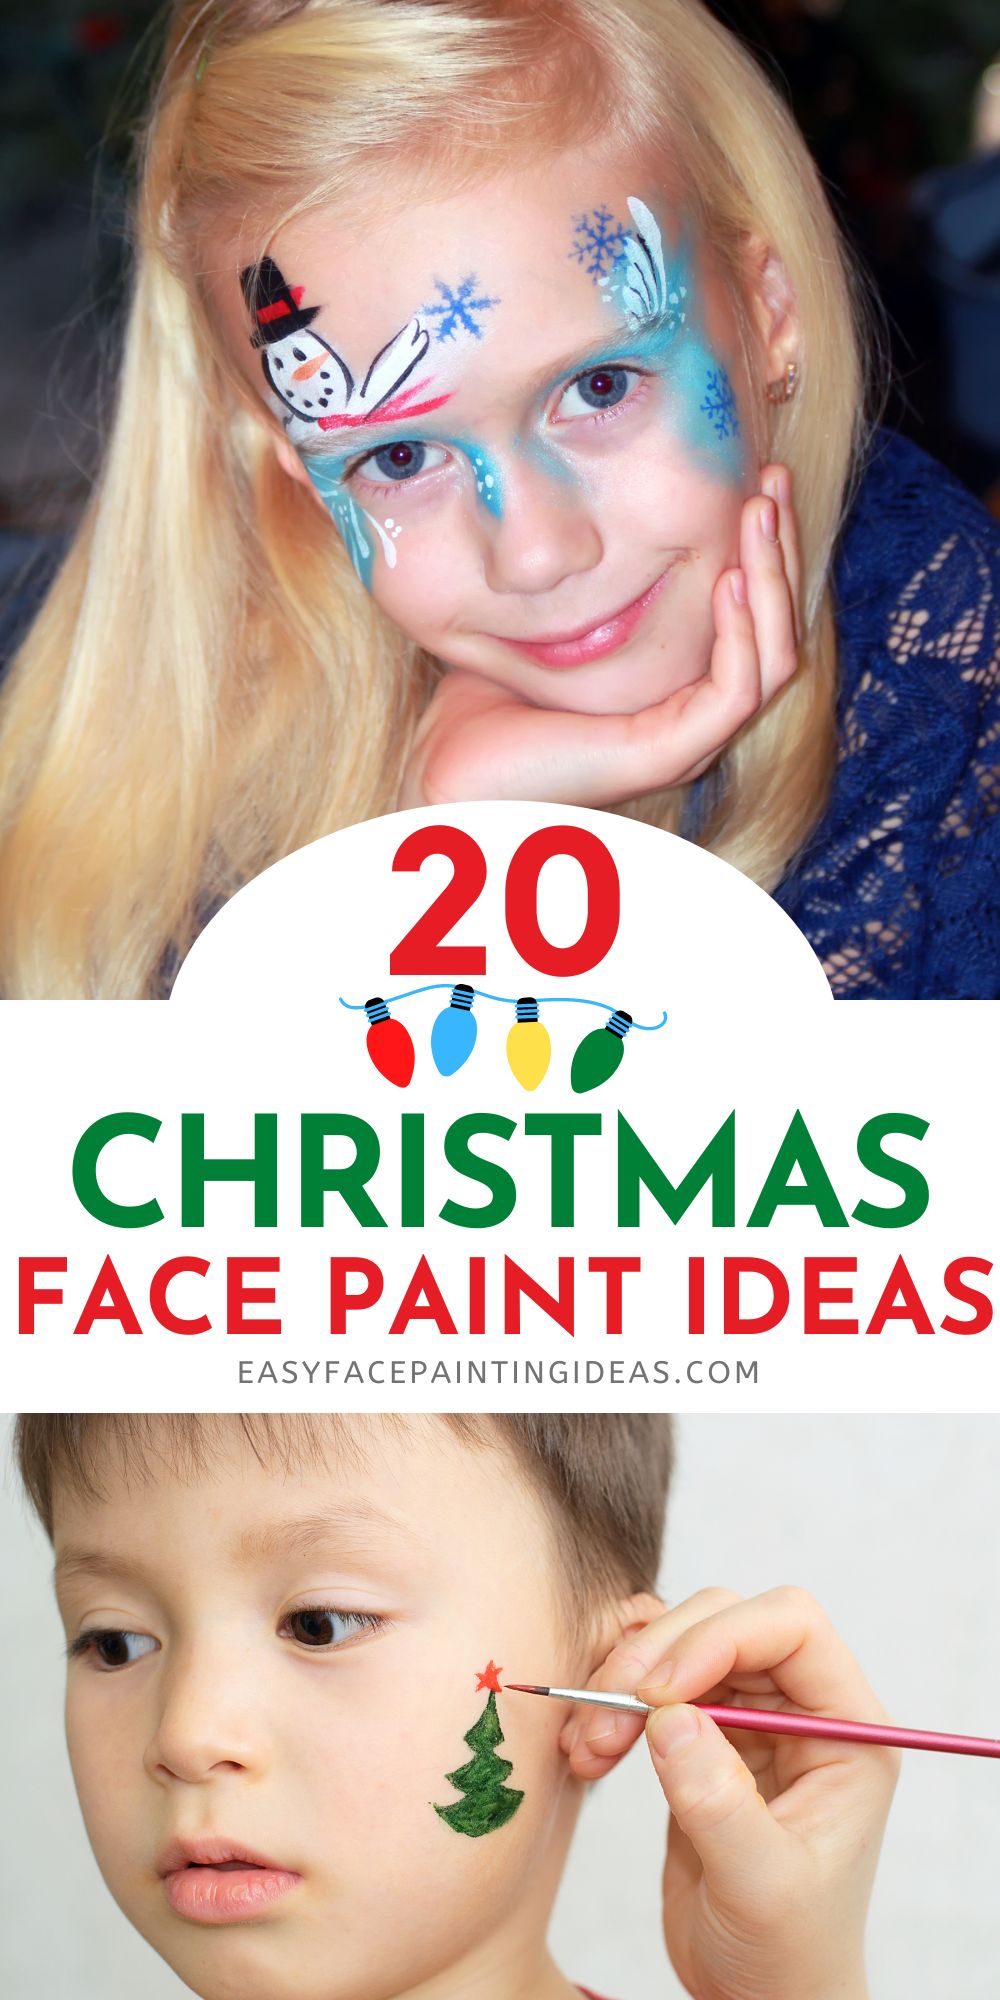 two photos showing children with Christmas face paint designs. An overlay reads, "20 Christmas Face Paint Ideas"